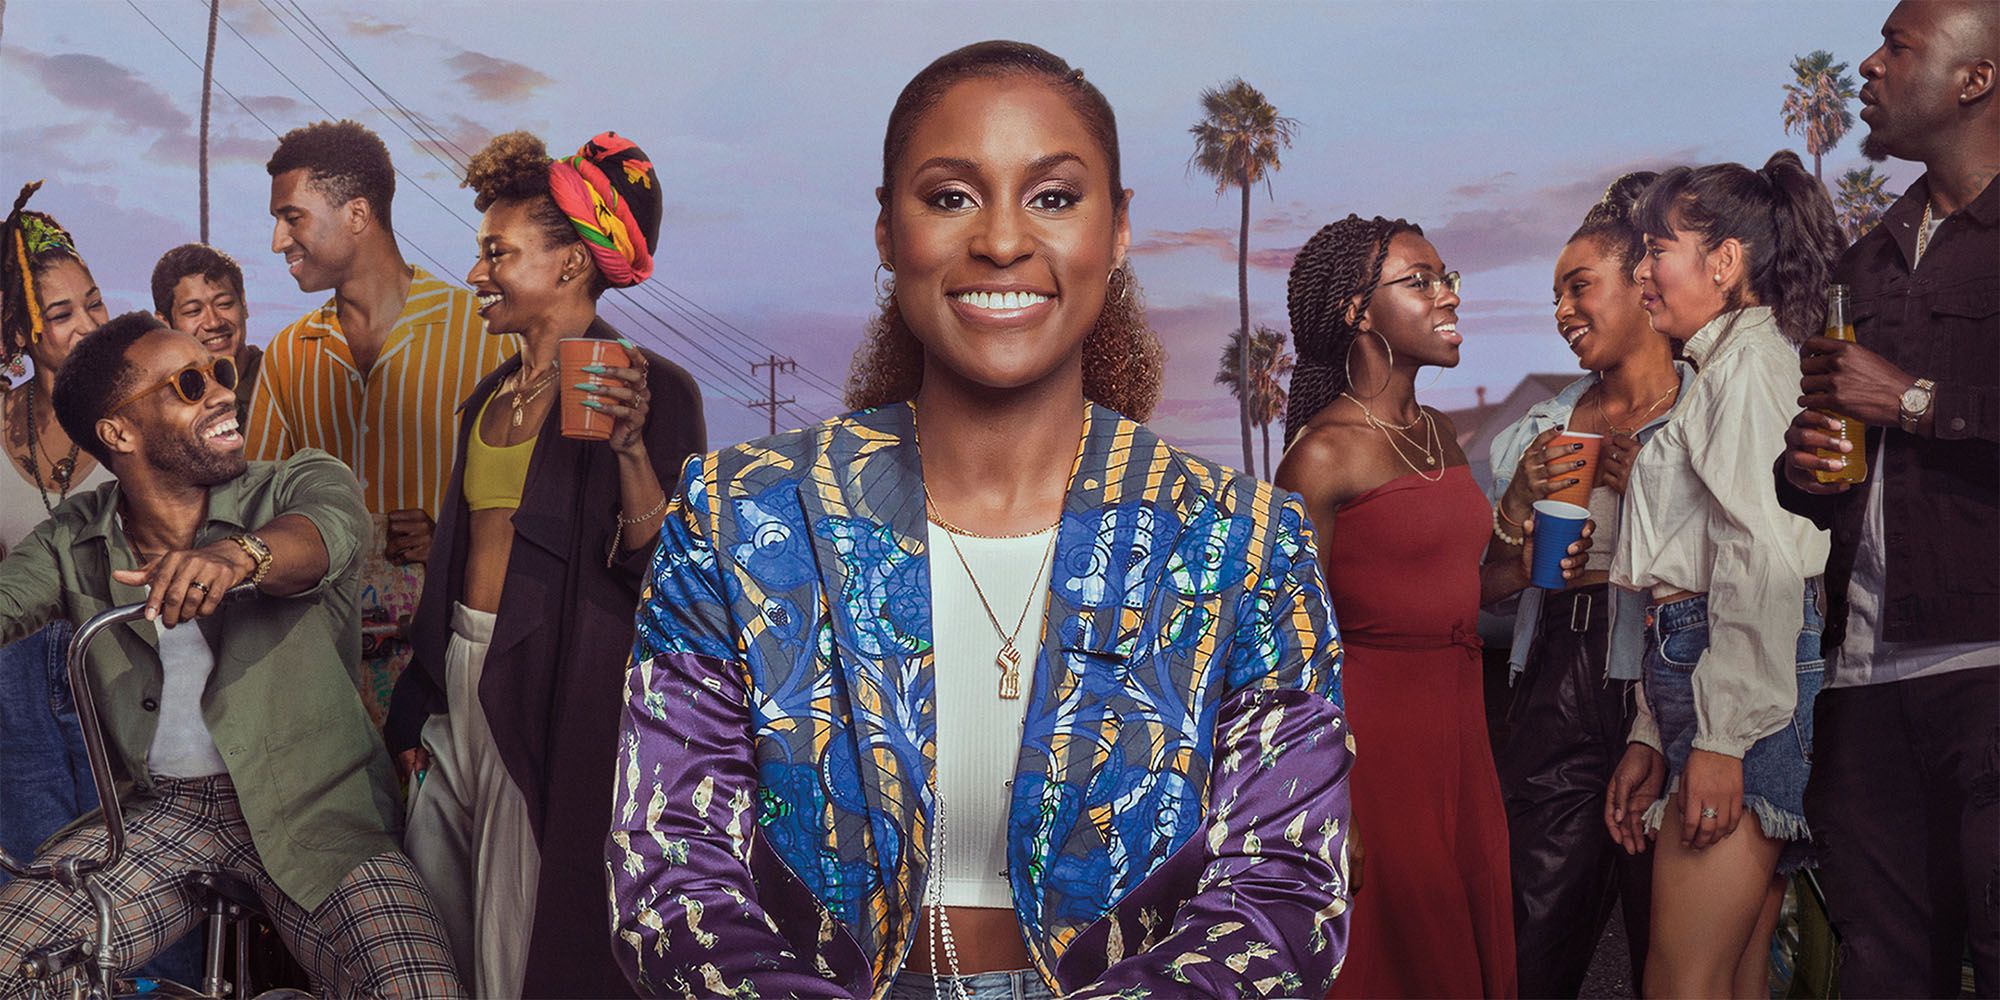 Image of Issa Rae and the rest of the cast of Insecure outside holding drinks with palm trees in the background.